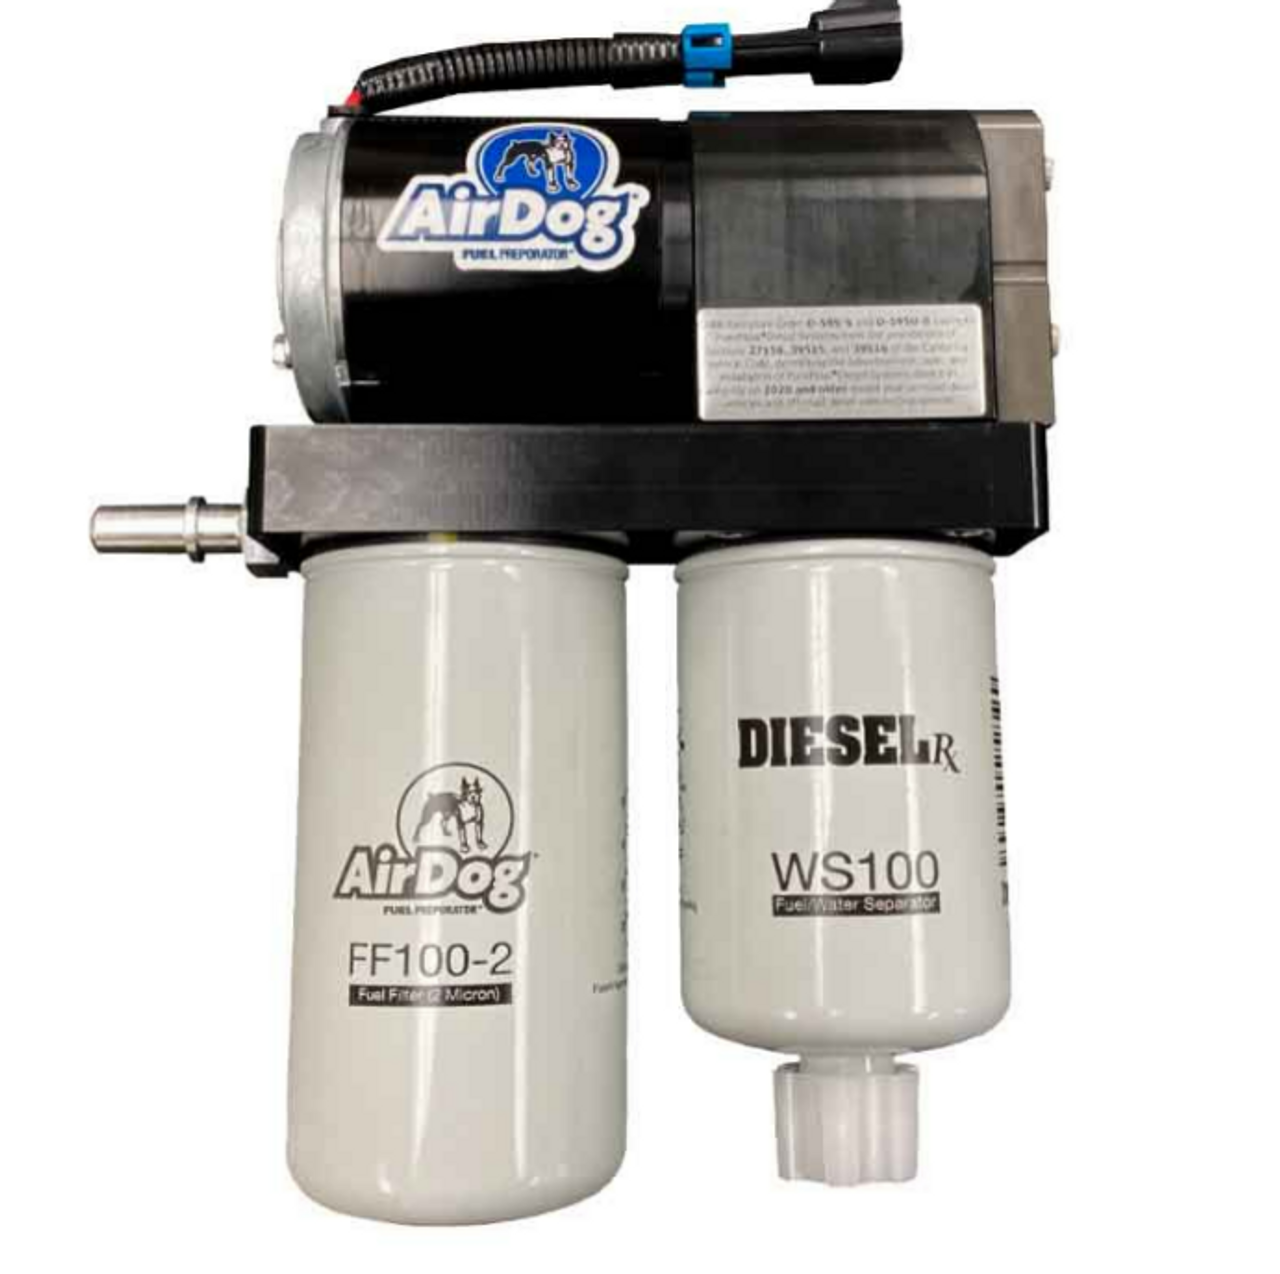  AirDog I-4G Lift Pump Diesel Fuel System 100 GPH (without in-tank fuel pump) for 1998.5 to 2004 Dodge 5.9L Cummins (A4SPBD101) Main View